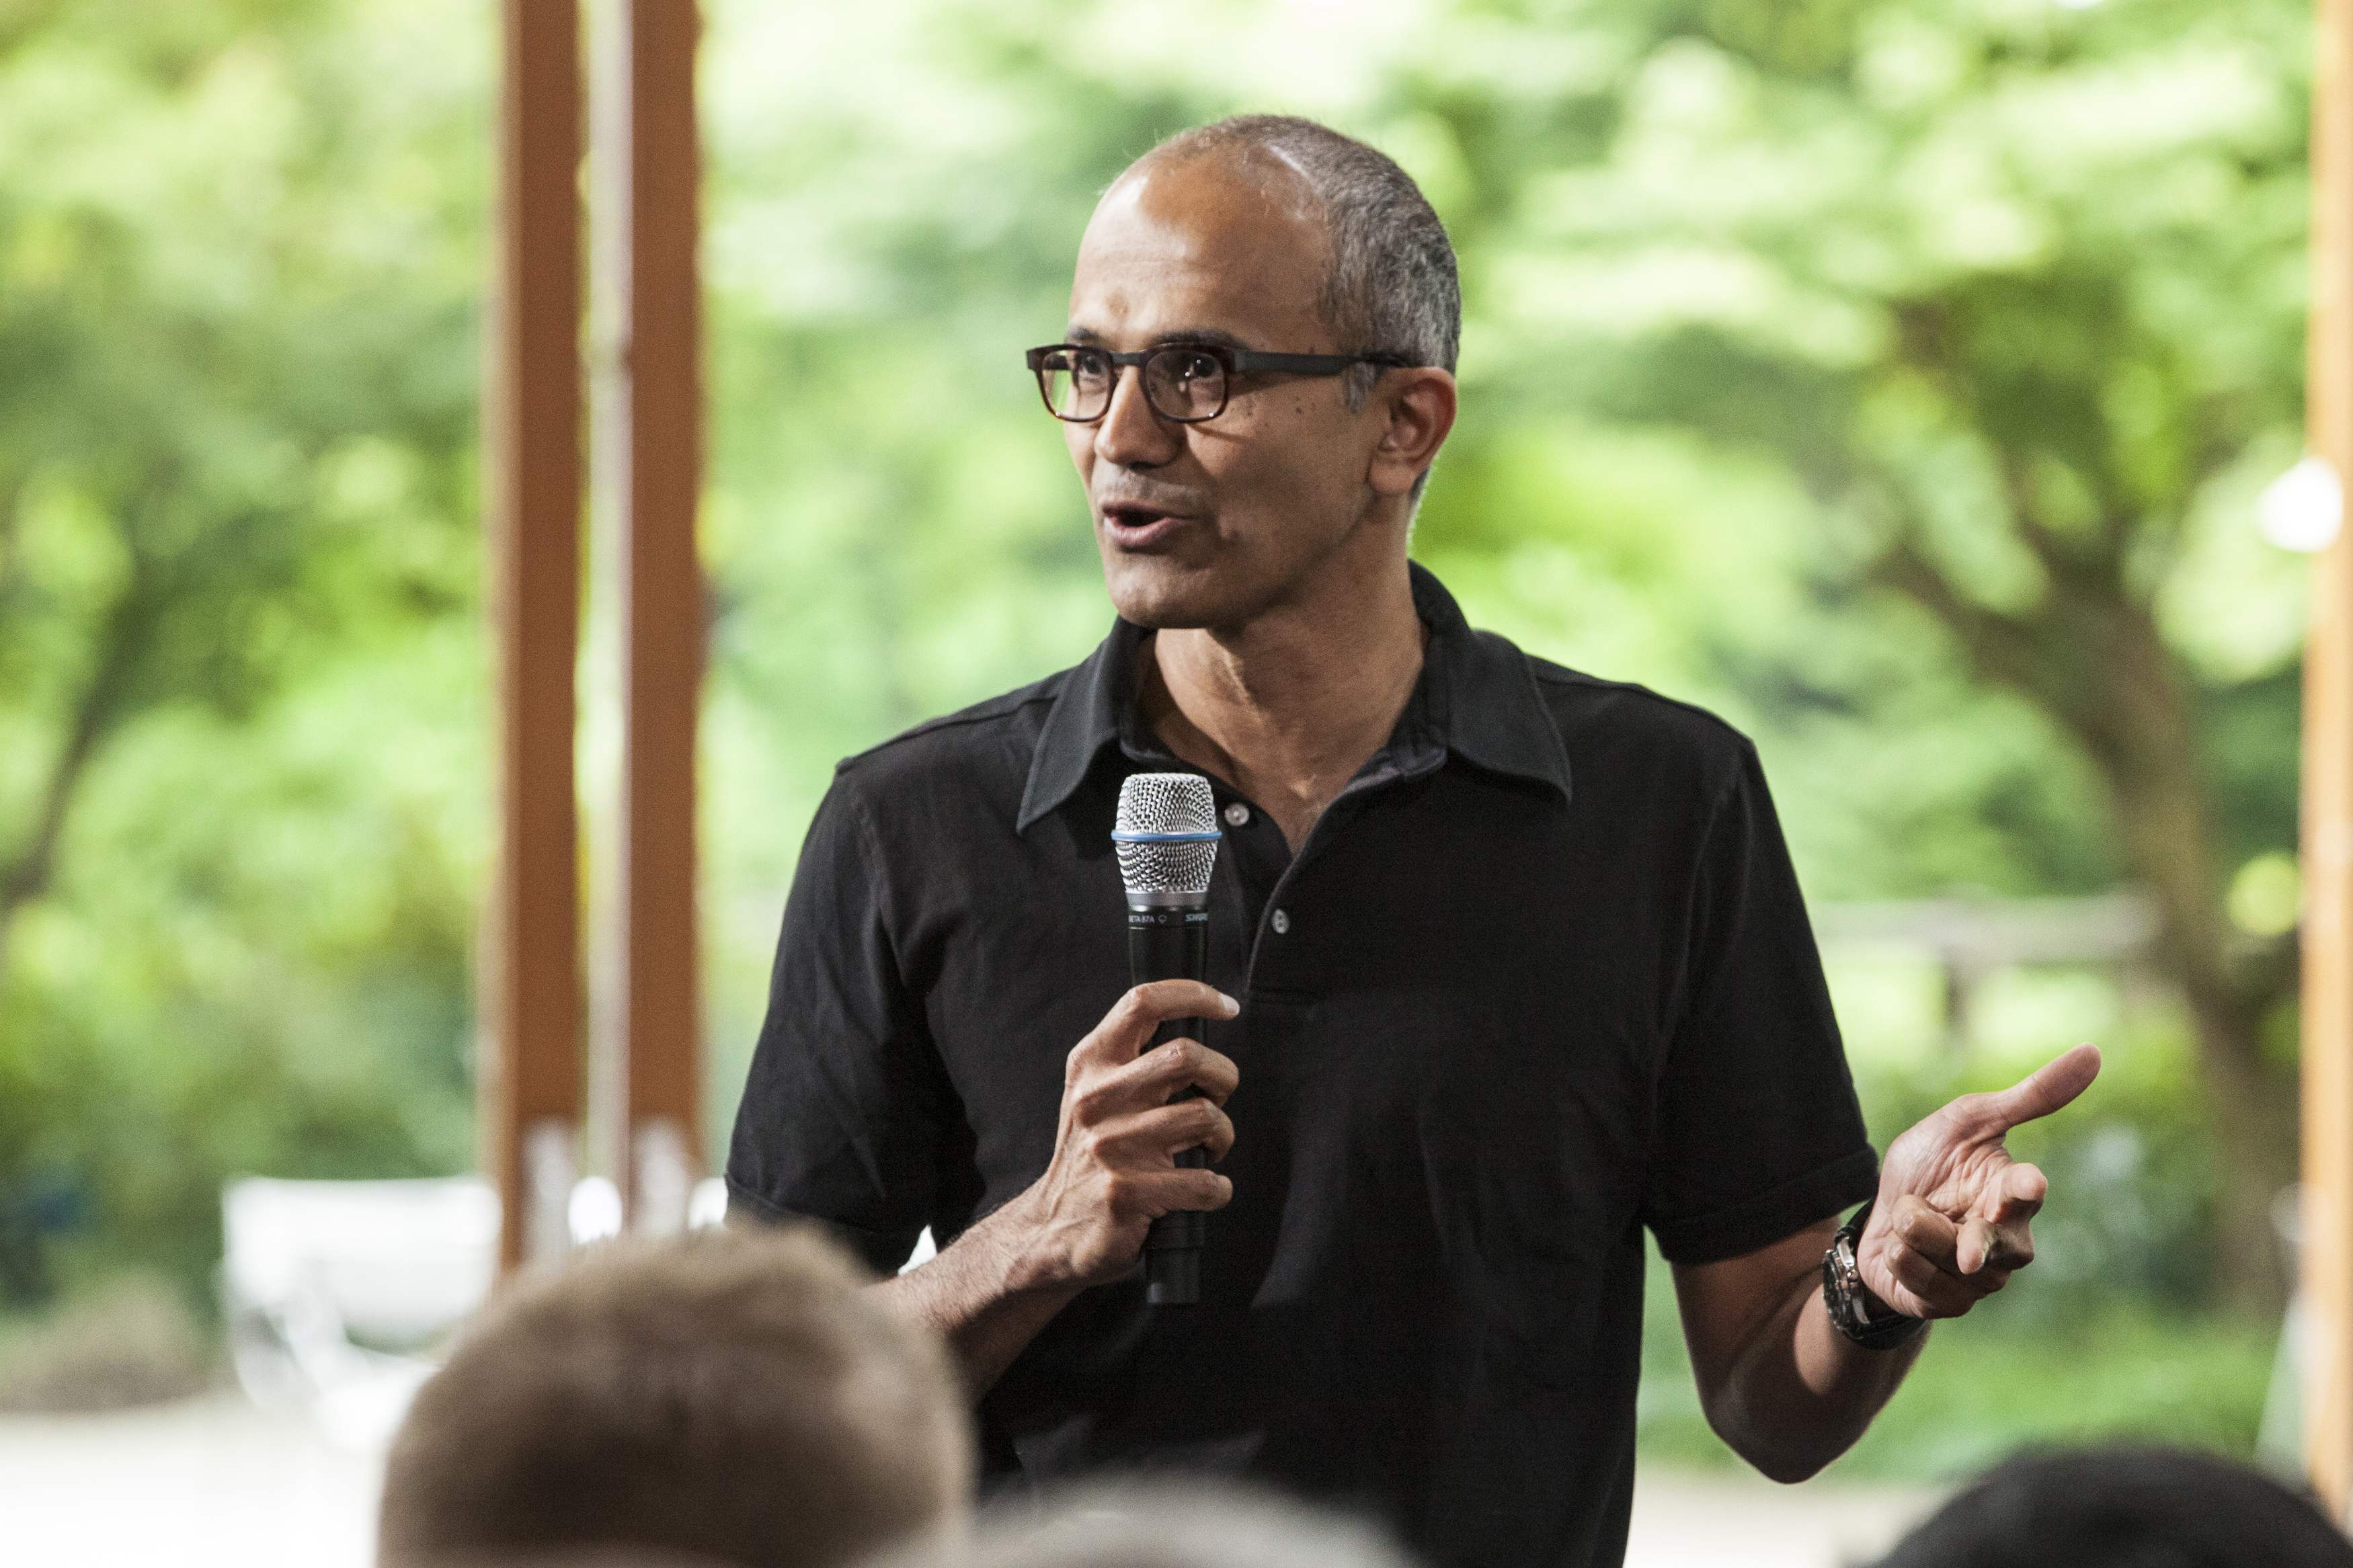 Satya Nadella will have a lot on his plate as he reshapes Microsoft into a “mobile-first, cloud-first” company. Photo: Reuters